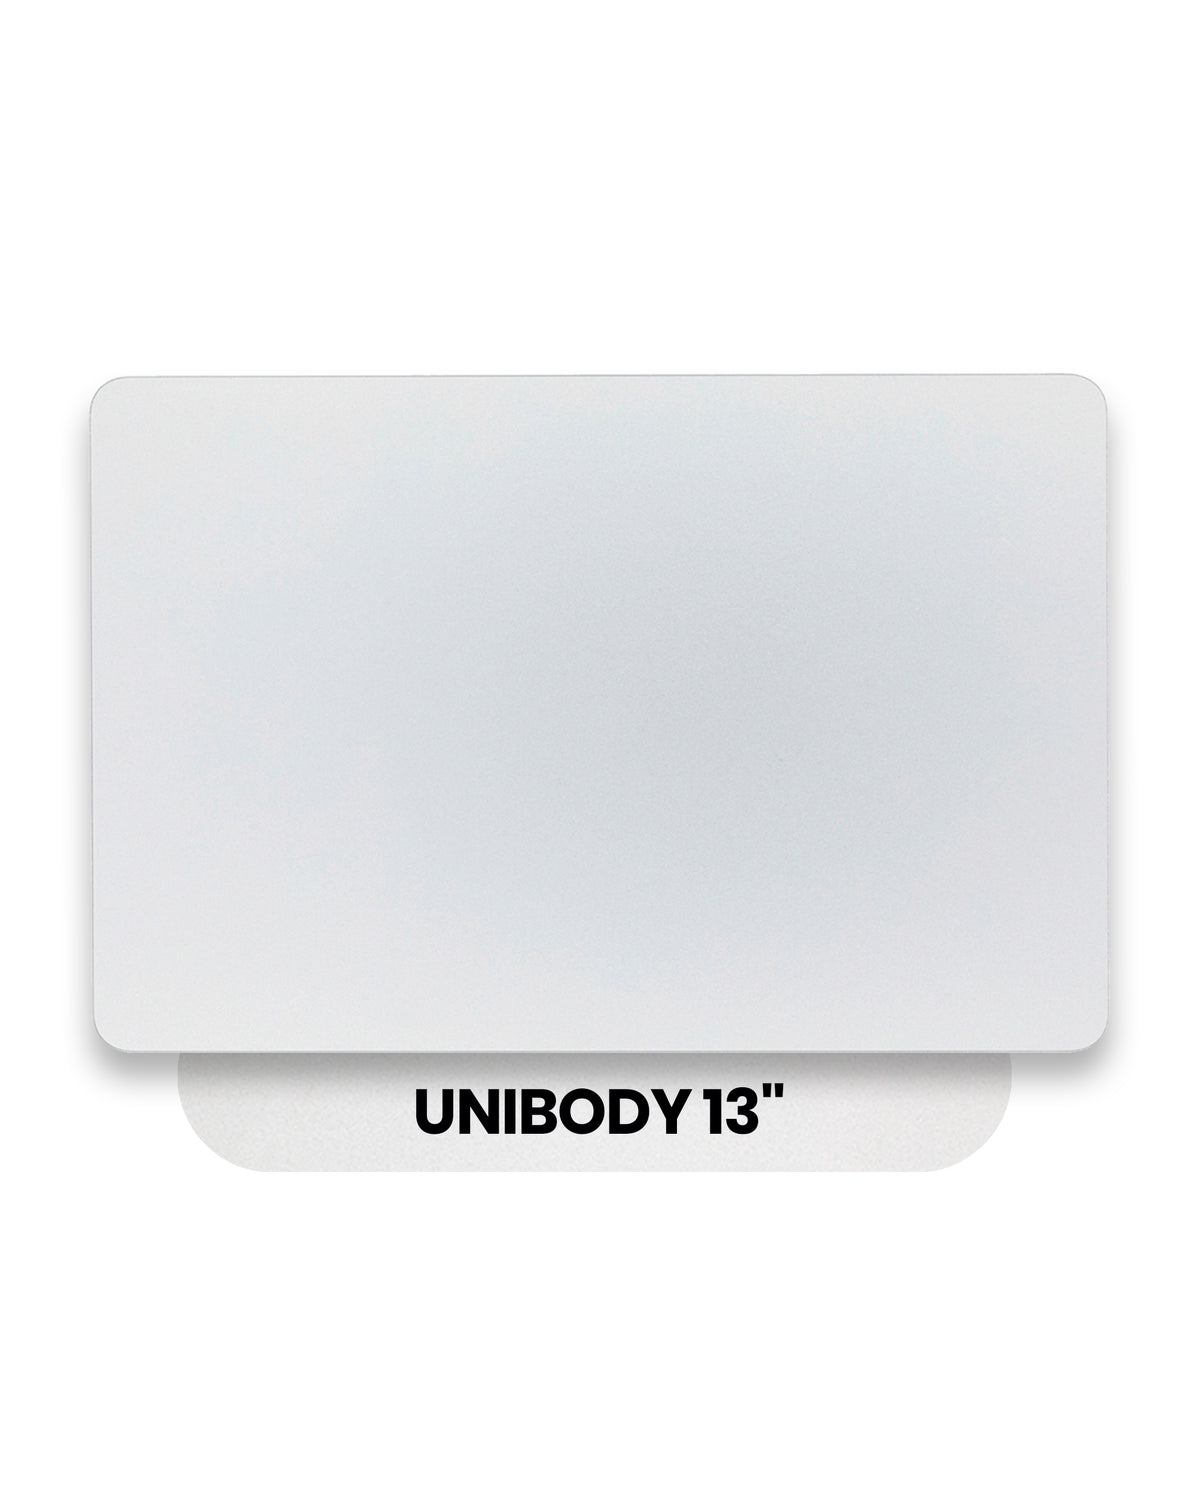 TRACKPAD FOR MACBOOK UNIBODY 13" A1278  (LATE 2008)